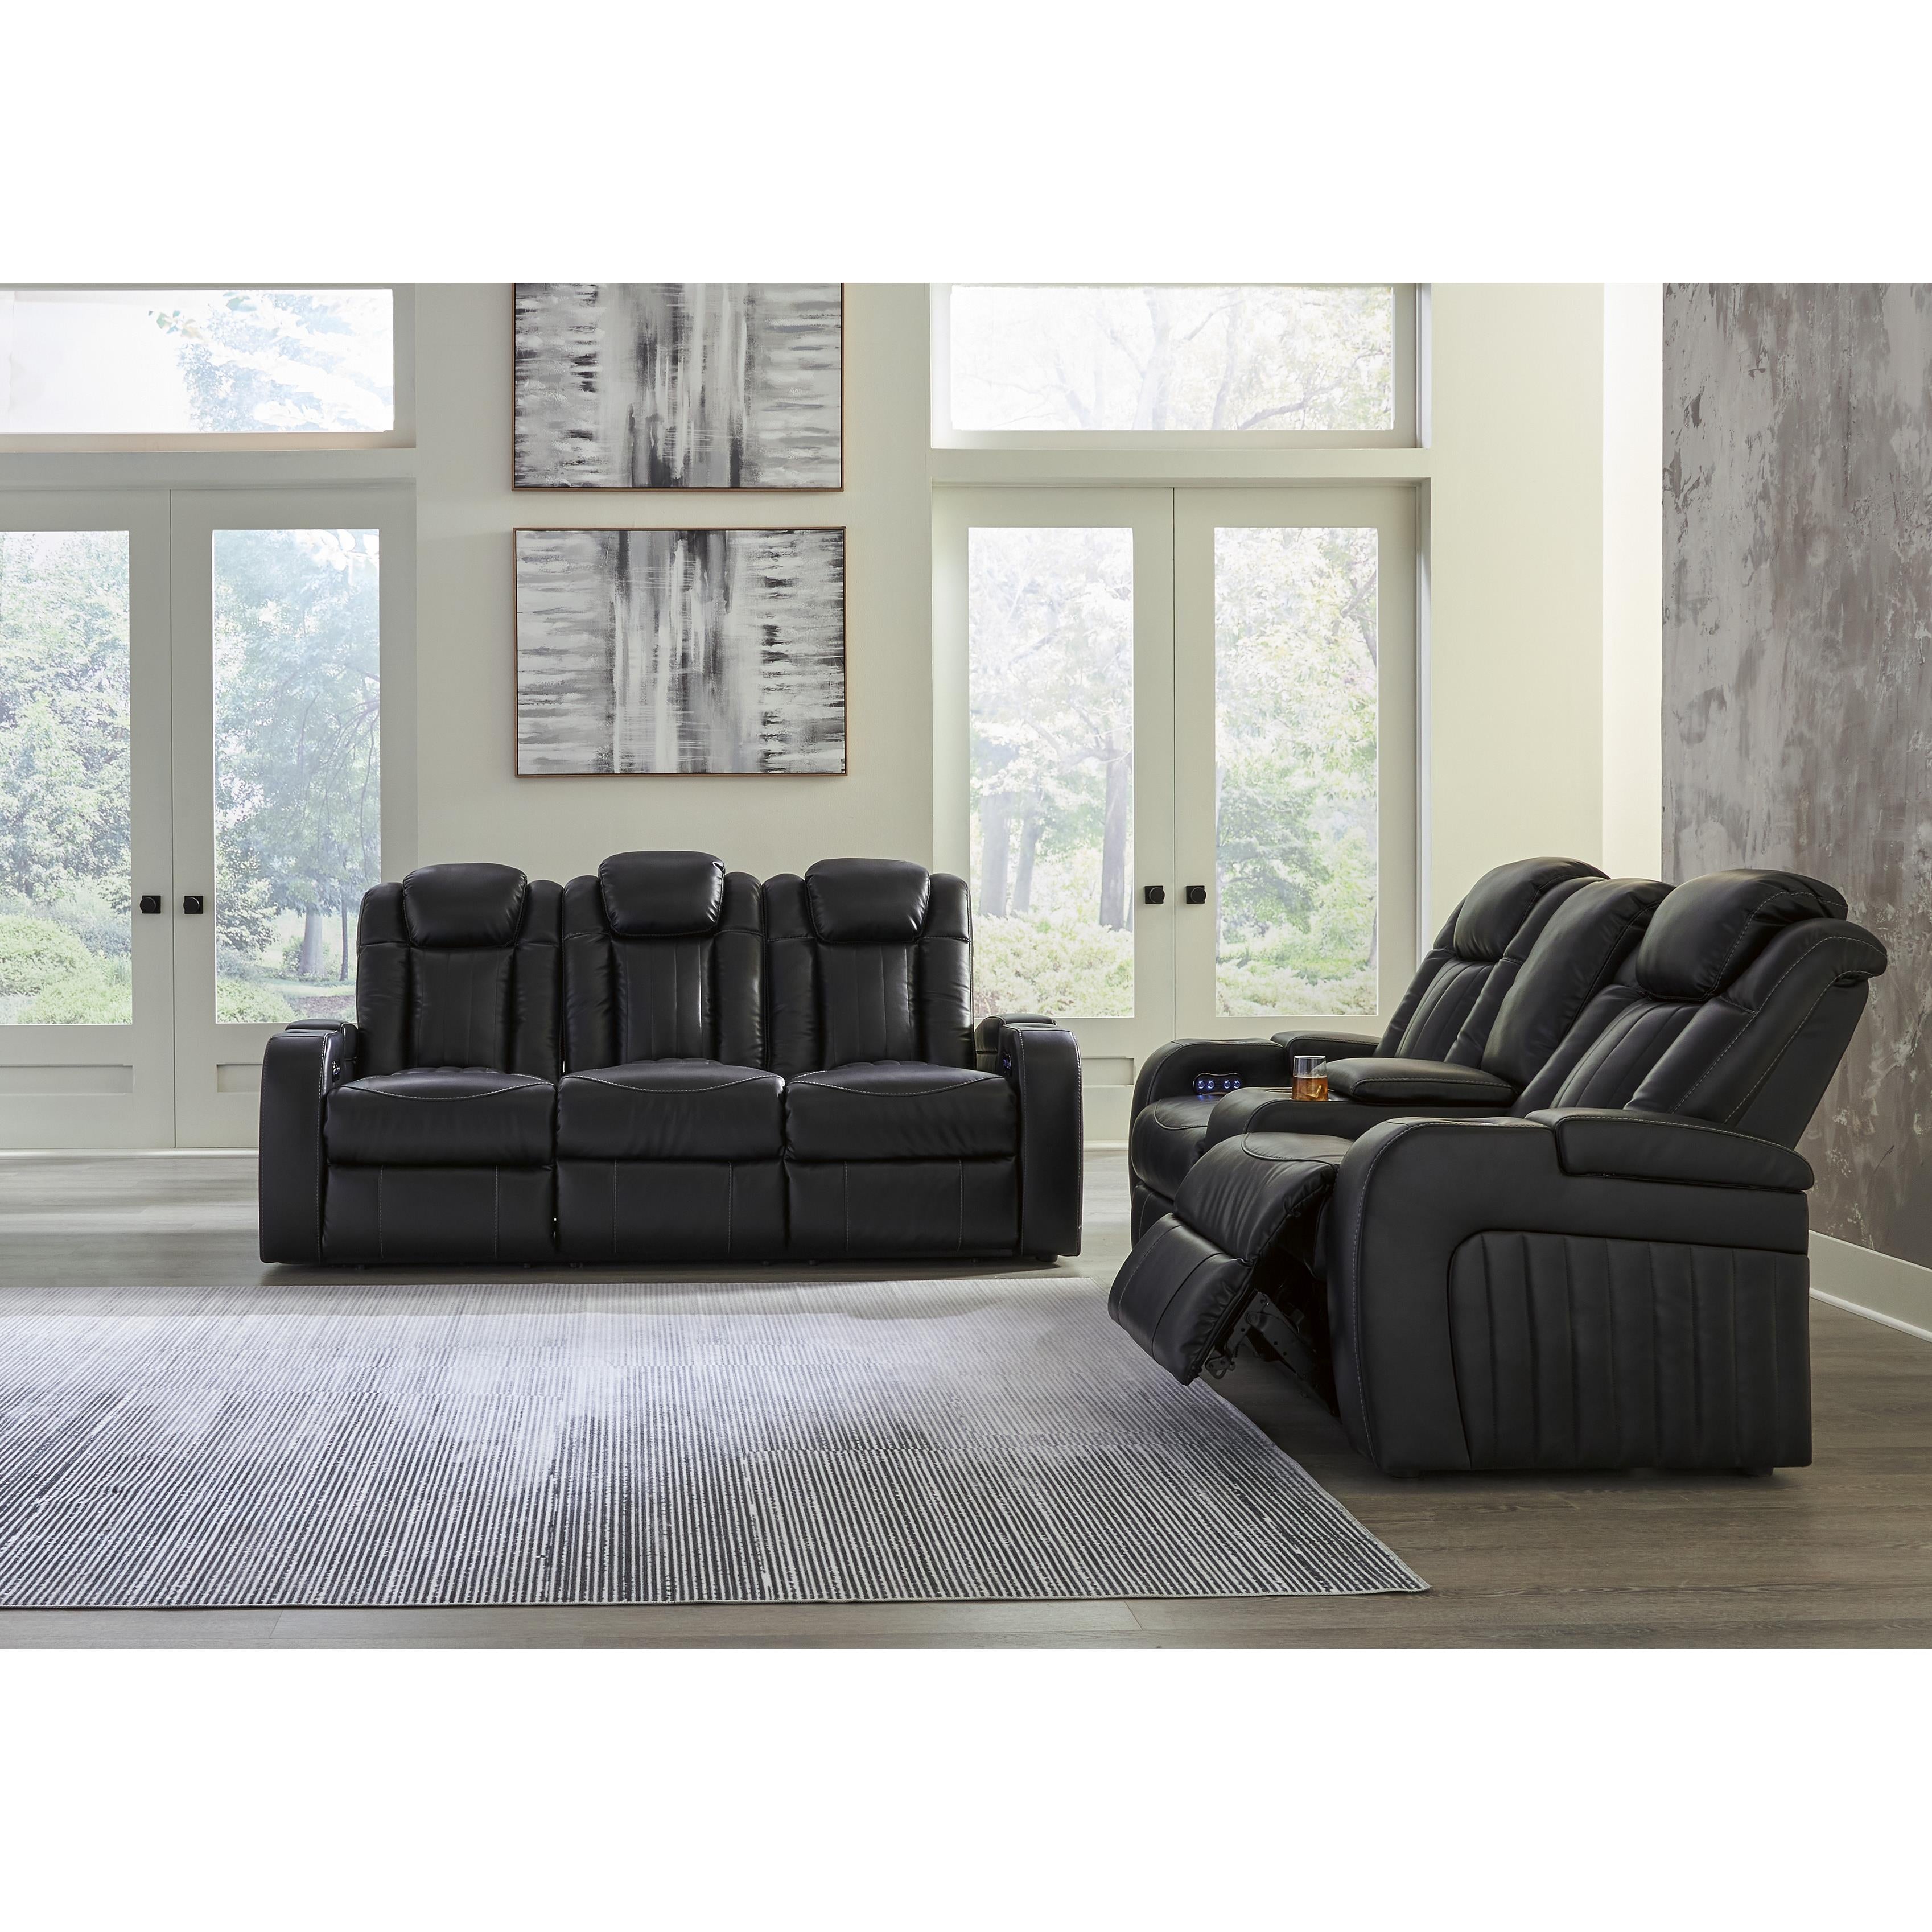 Signature Design by Ashley Caveman Den Power Reclining Leather Look Sofa 9070315 IMAGE 11